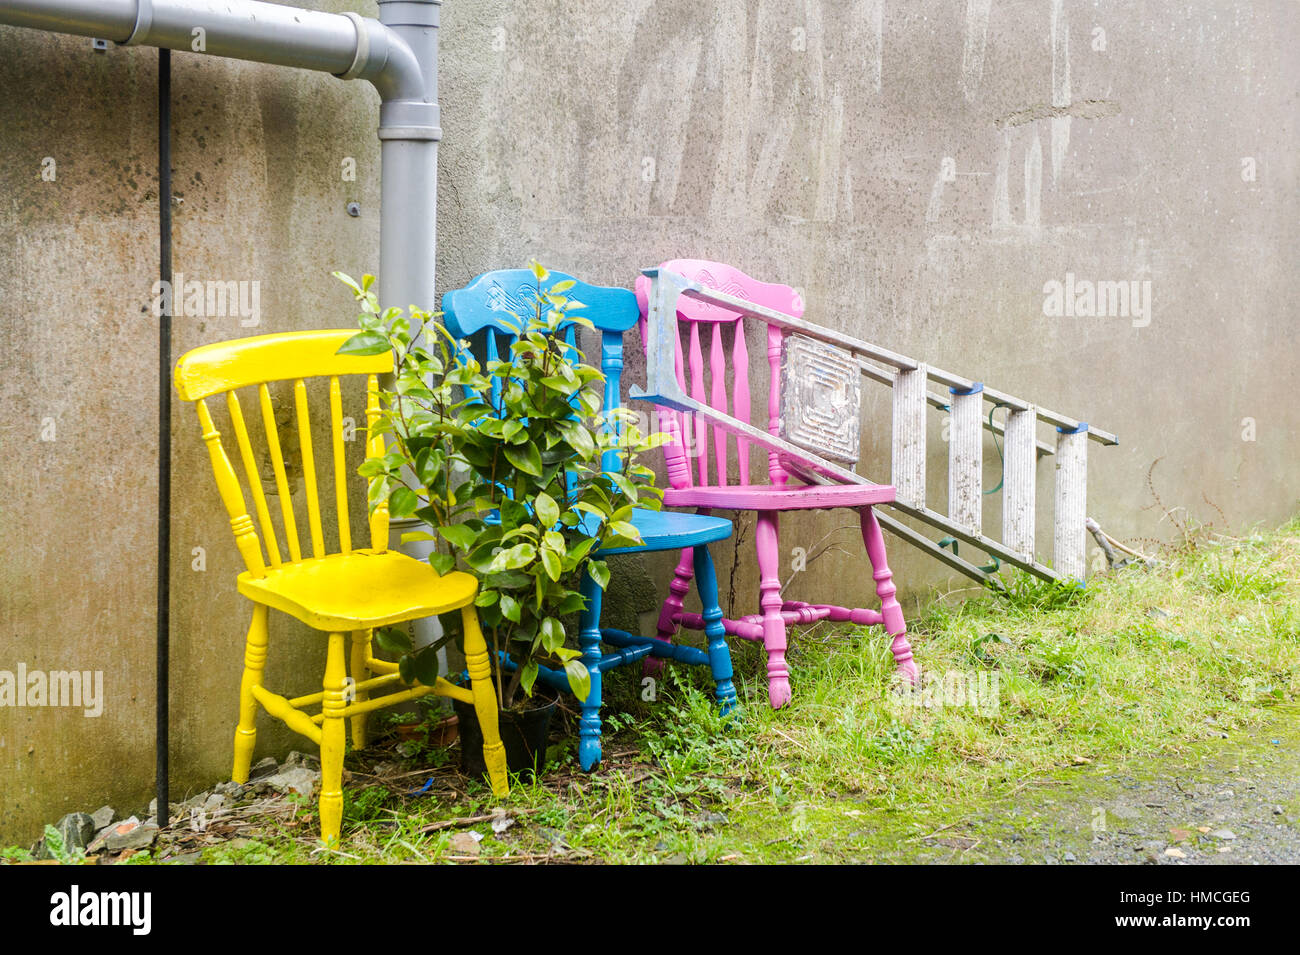 Three recycled/upcycled colourful chairs and a step ladder against a wall in an alleyway with grass and copy space. Stock Photo